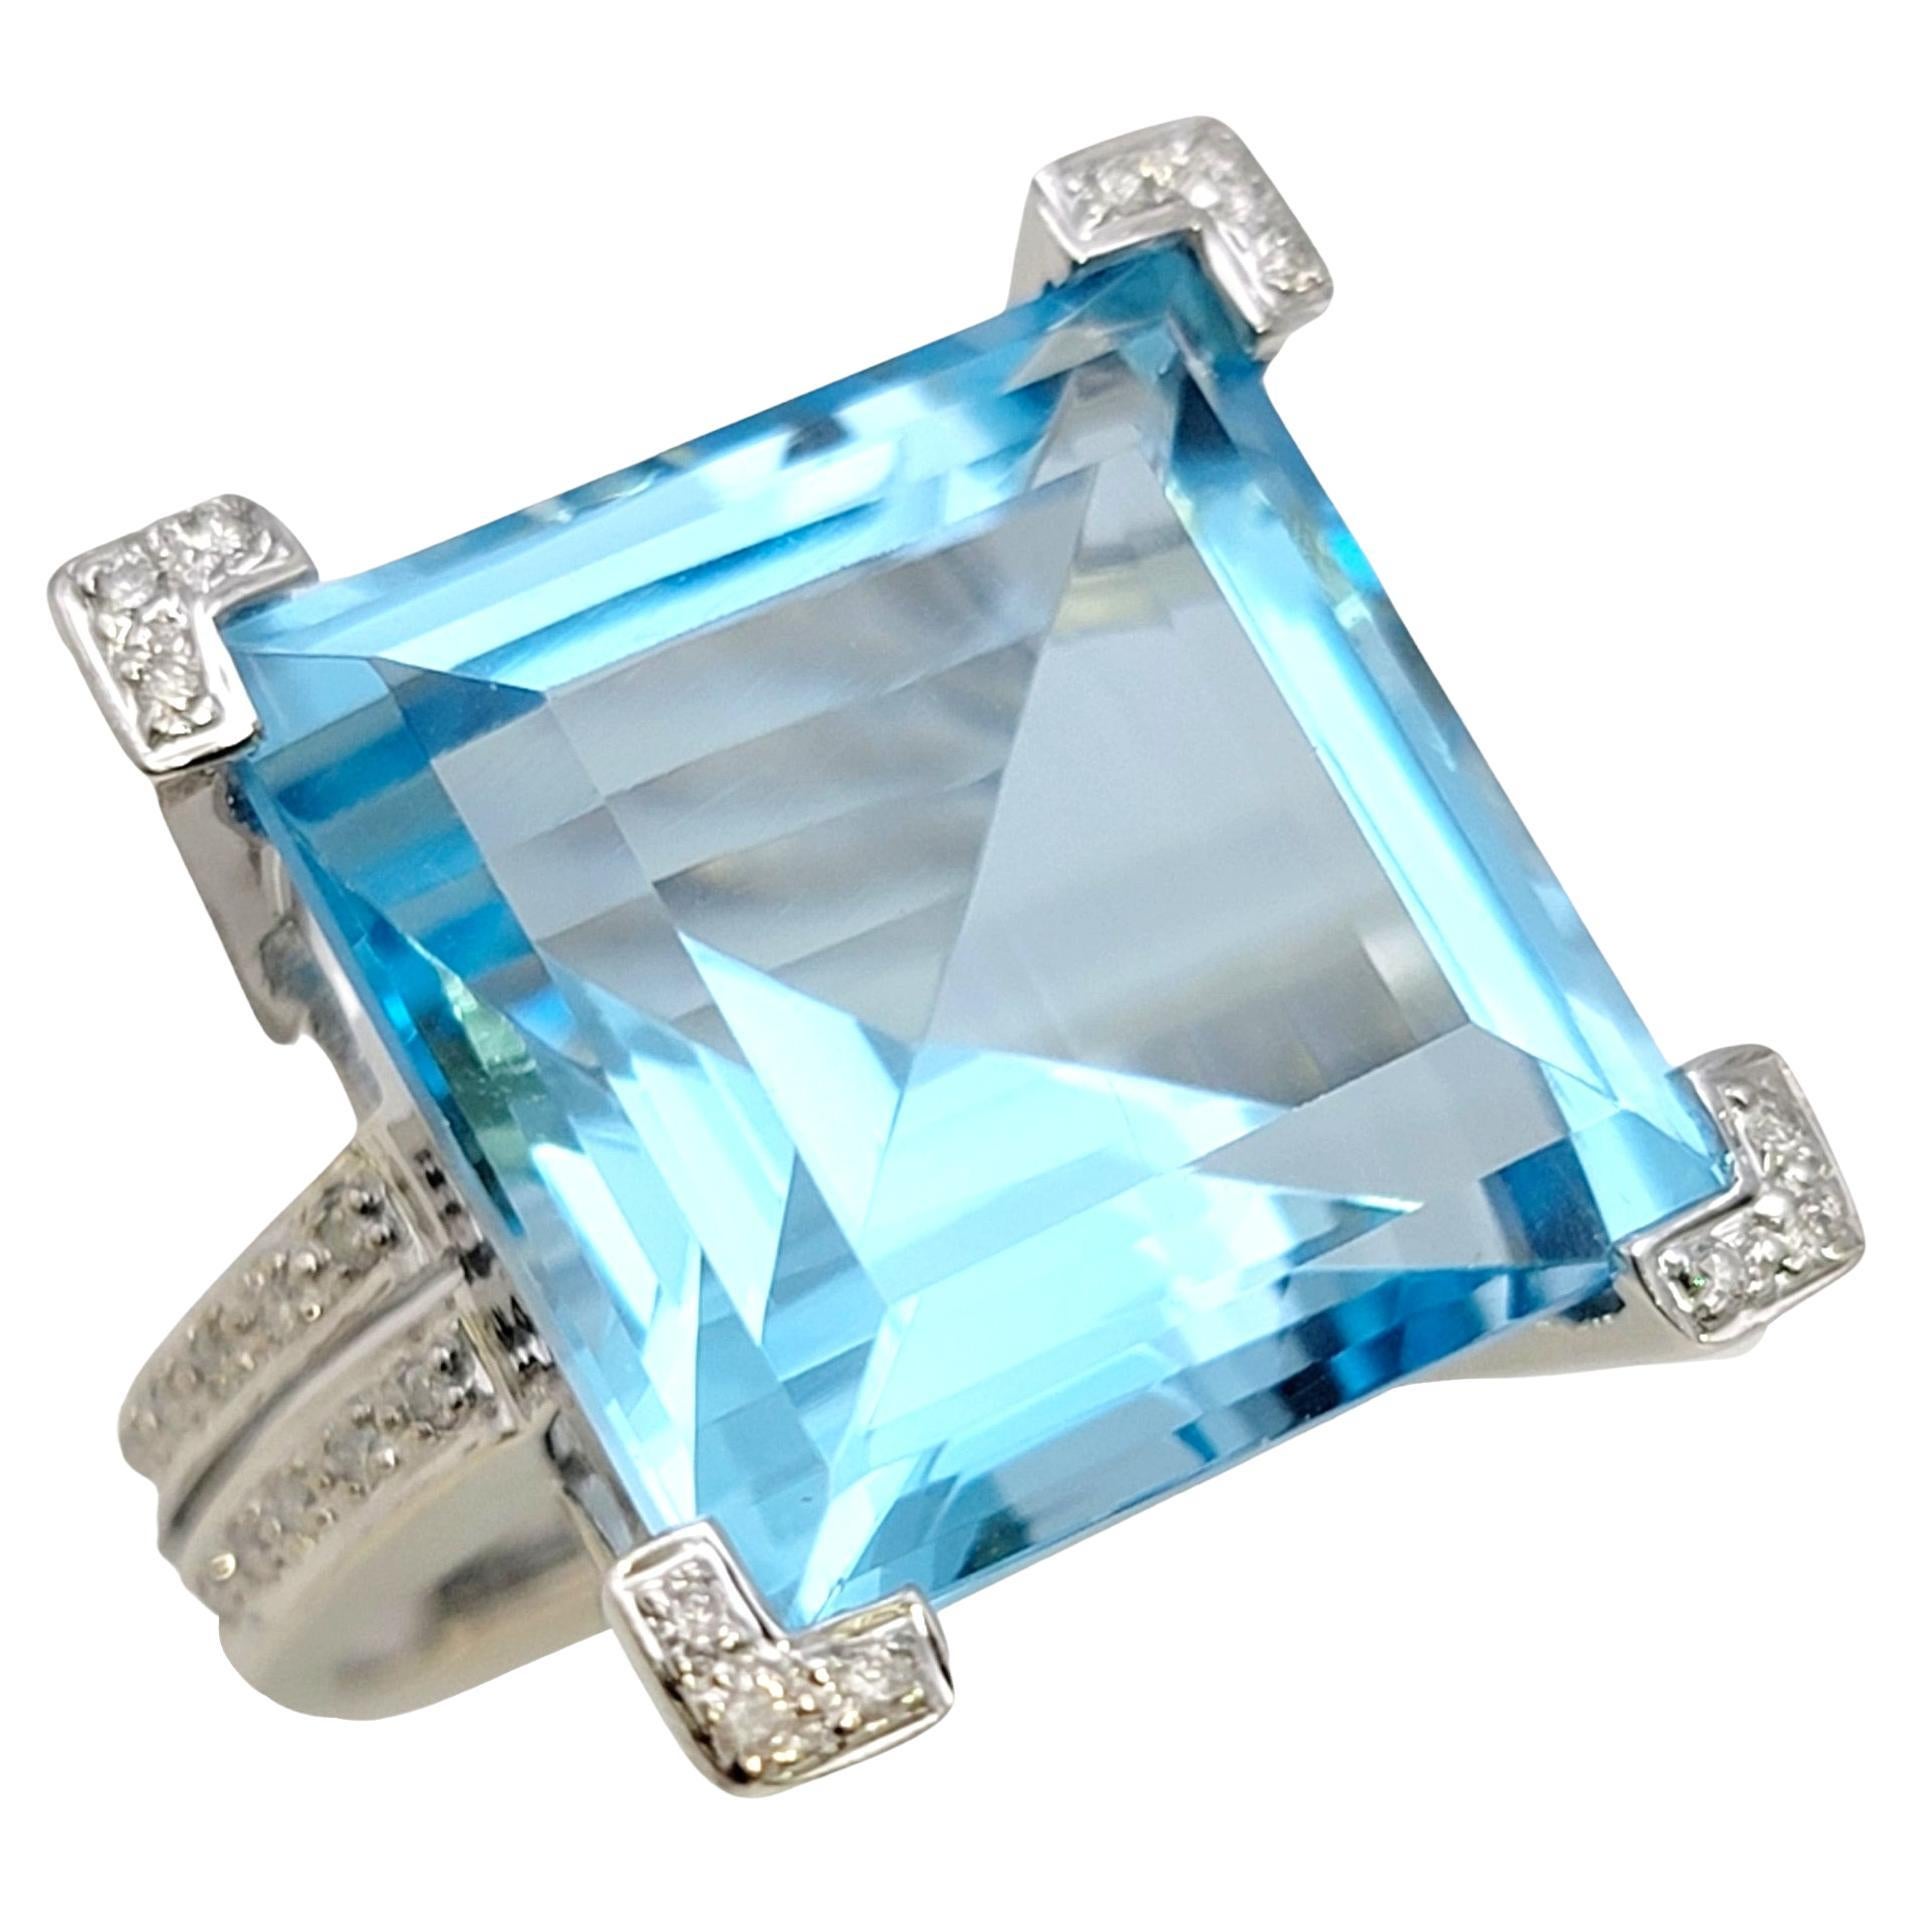 Ring size: 6.5

Indulge in the undeniable elegance of this exquisite 34.62 carat blue topaz cocktail ring. This extraordinary piece is the epitome of sophistication and refinement, designed to captivate hearts and spark conversations.

Crafted to